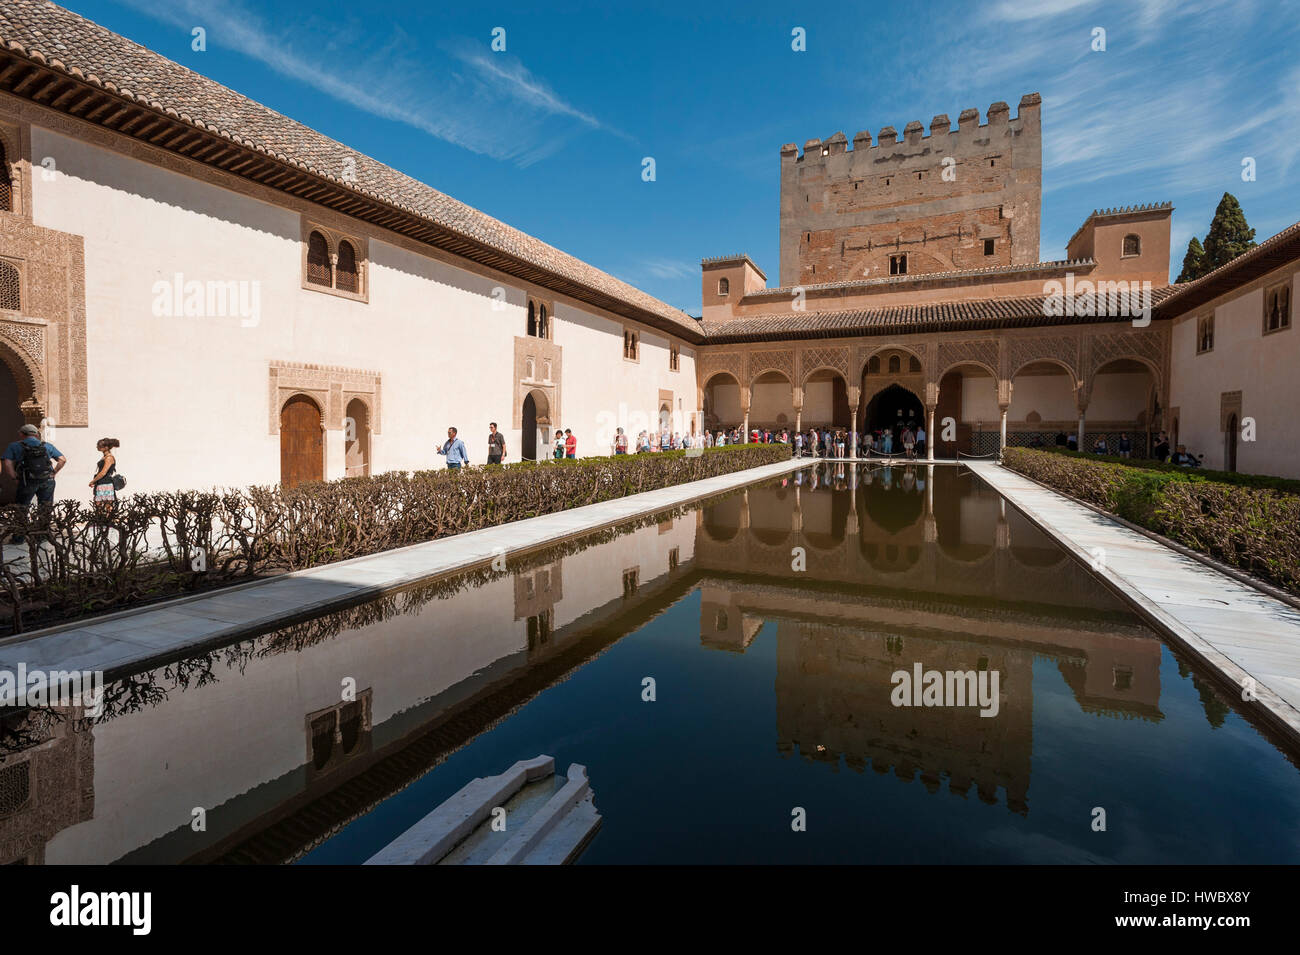 Court of the Myrtles, Alhambra, Granada, province of Granada, Andalusia, Spain, Europe Stock Photo